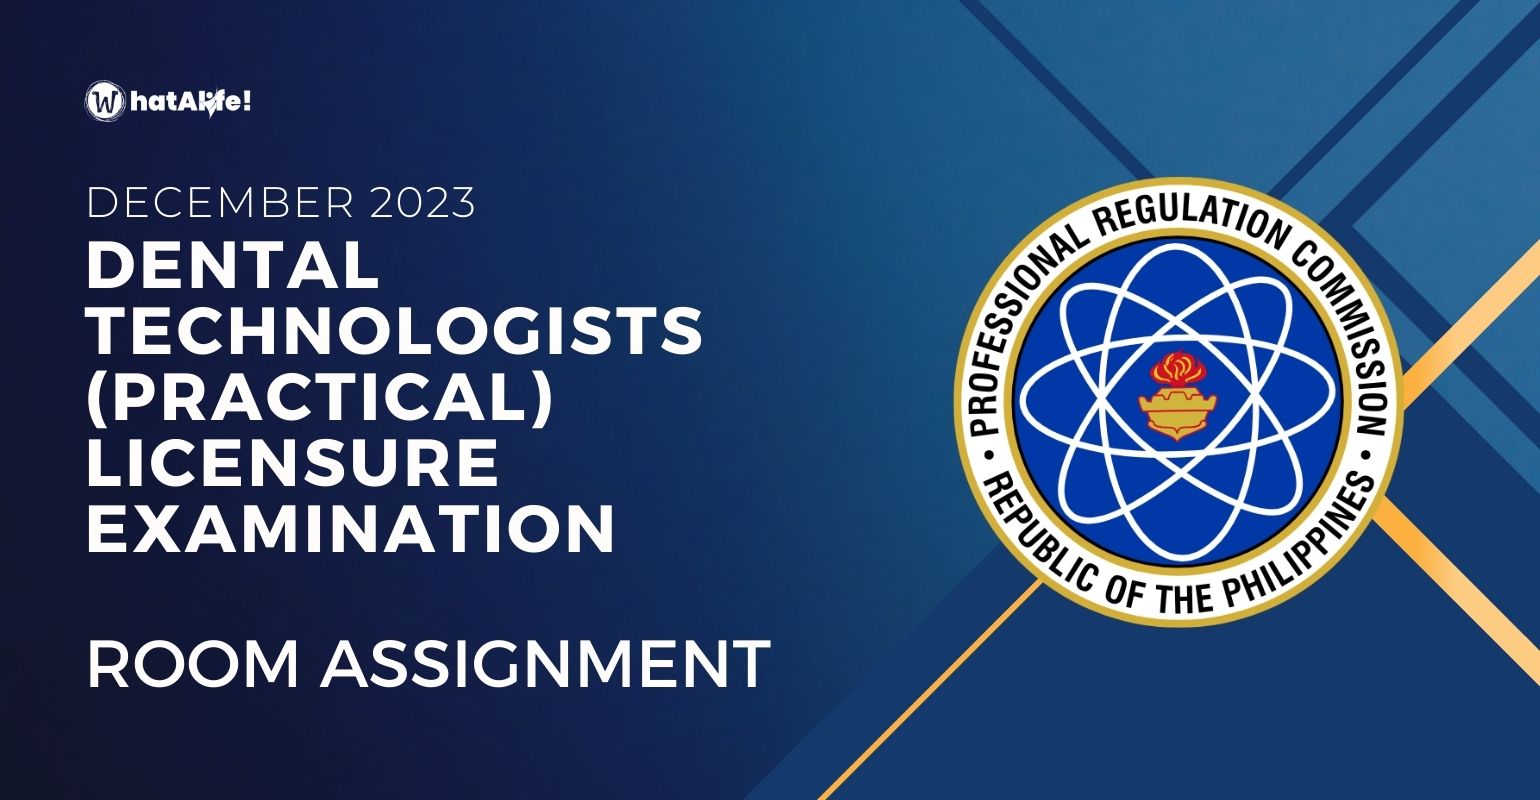 room assignment december 2023 dental technologists practical licensure exam